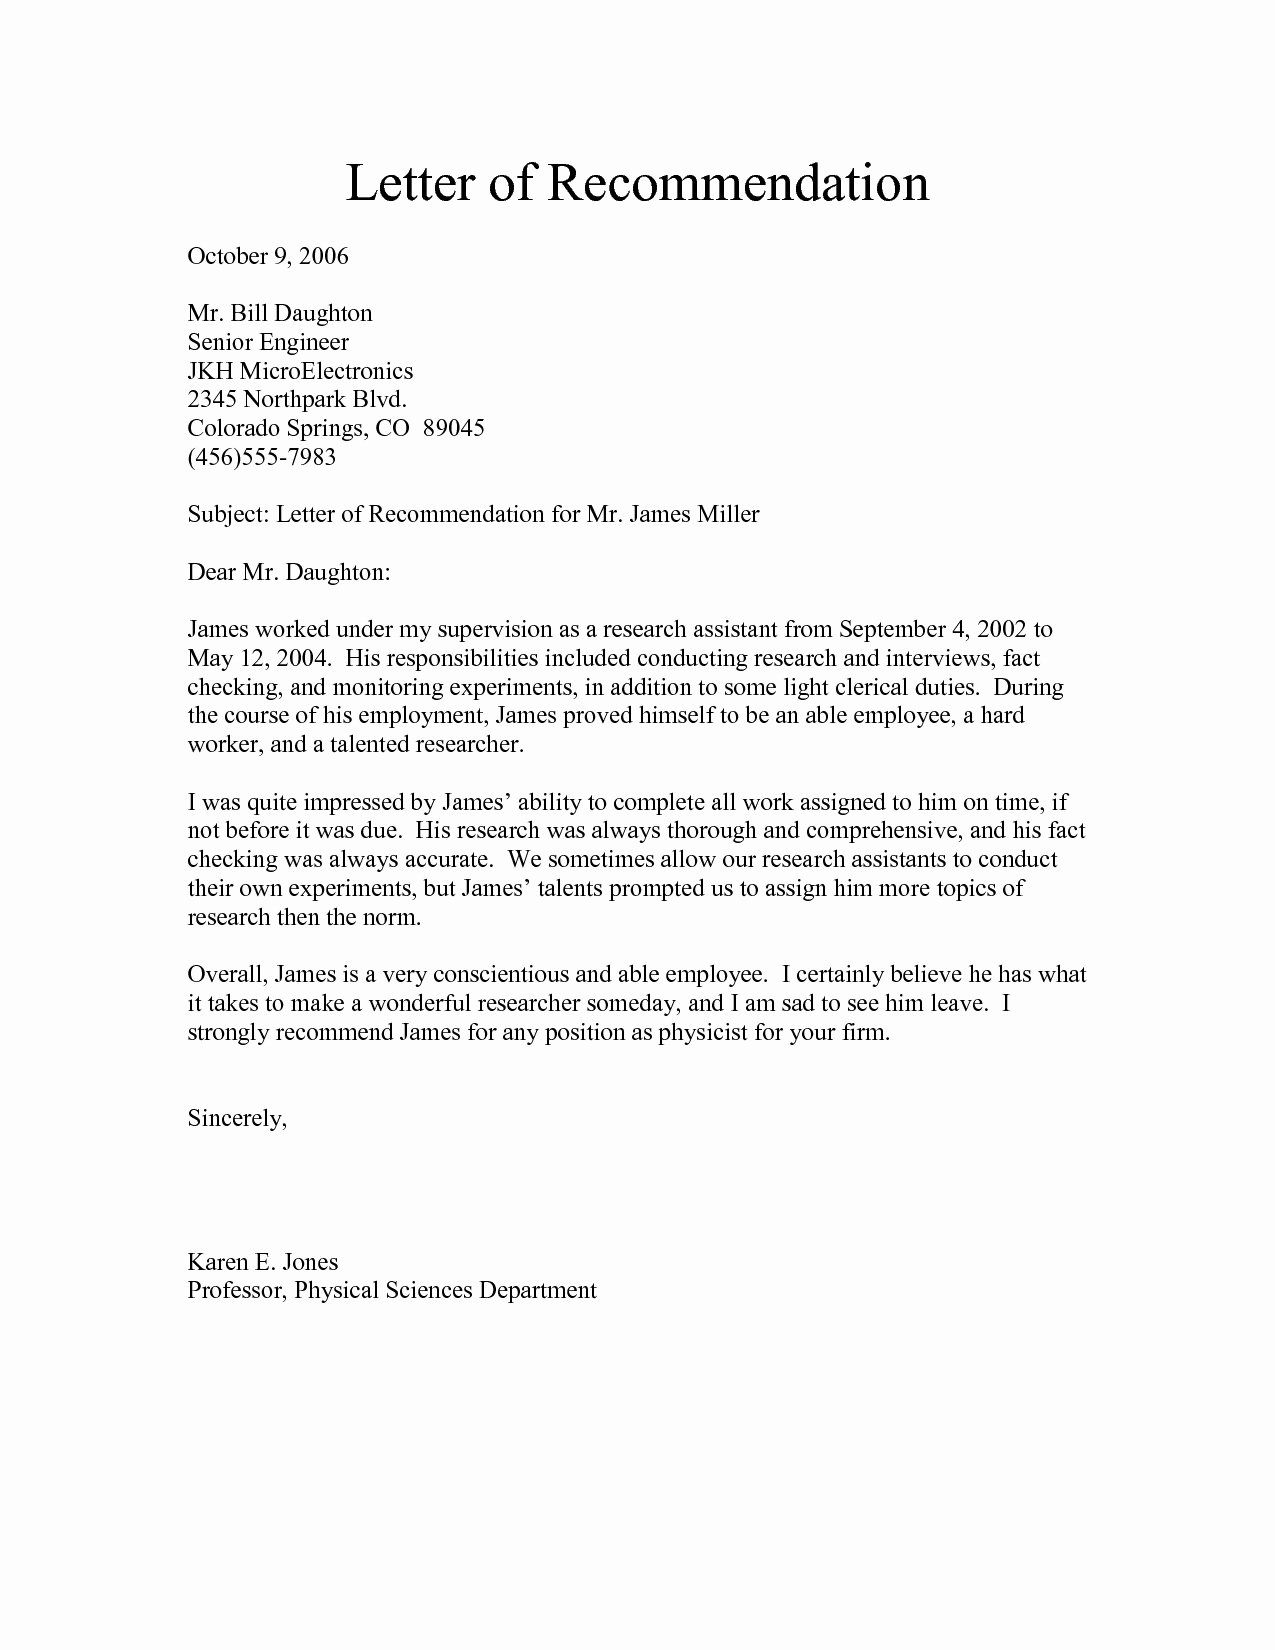 Physician assistant Letter Of Recommendation Inspirational Letter Re Mendation for Medical assistant